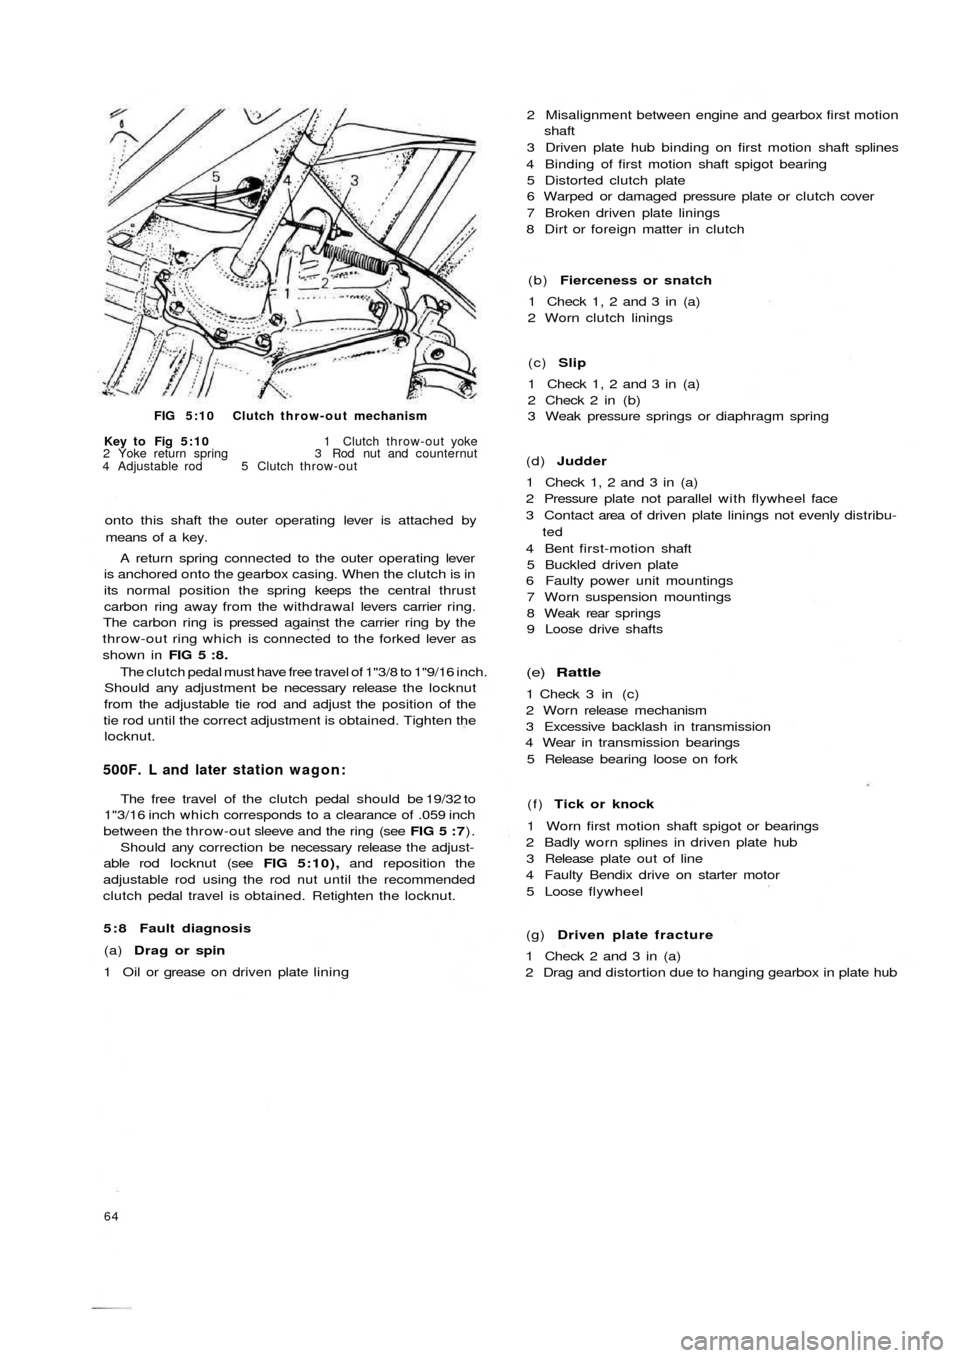 FIAT 500 1971 1.G Workshop Manual FIG 5:10 Clutch throw-out mechanism
Key to  Fig  5:10 1 Clutch throw-out yoke
2 Yoke return spring 3 Rod nut and counternut
4 Adjustable rod  5  Clutch throw-out
onto this shaft the outer operating le